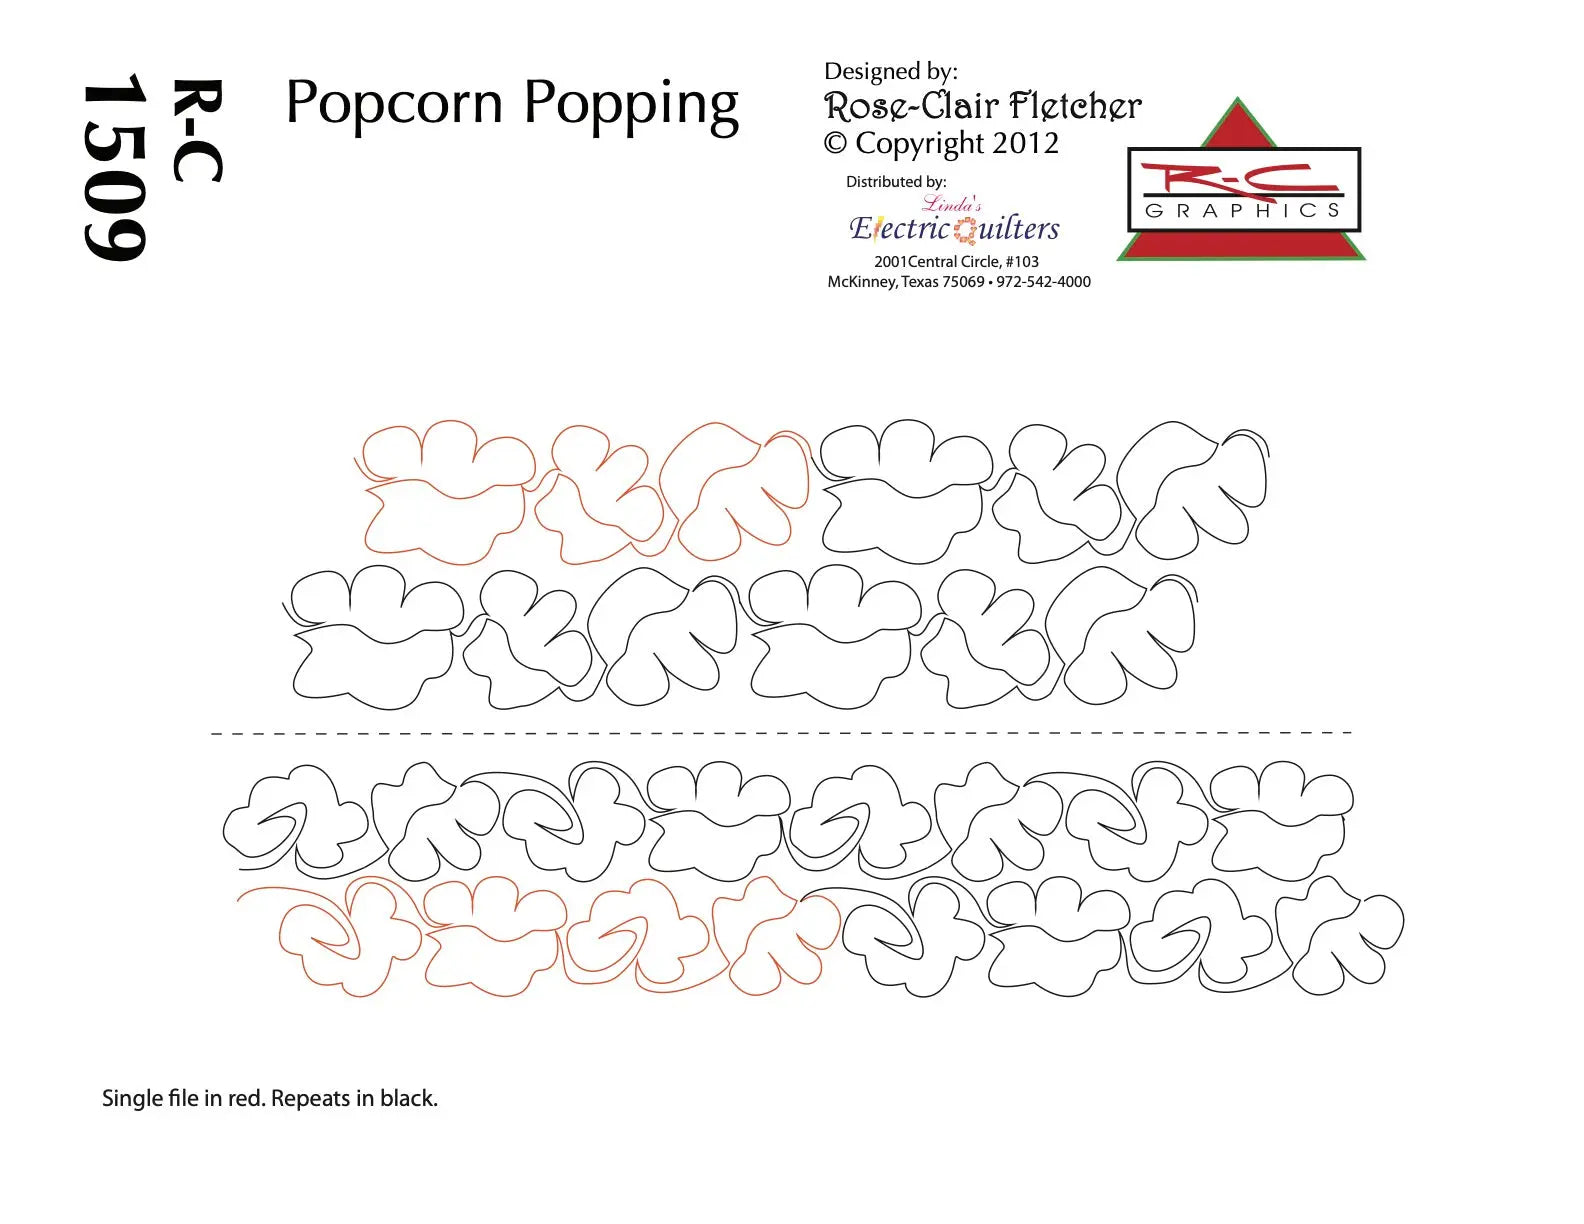 1509 Popcorn Popping Pantograph by Rose-Clair Fletcher - Linda's Electric Quilters